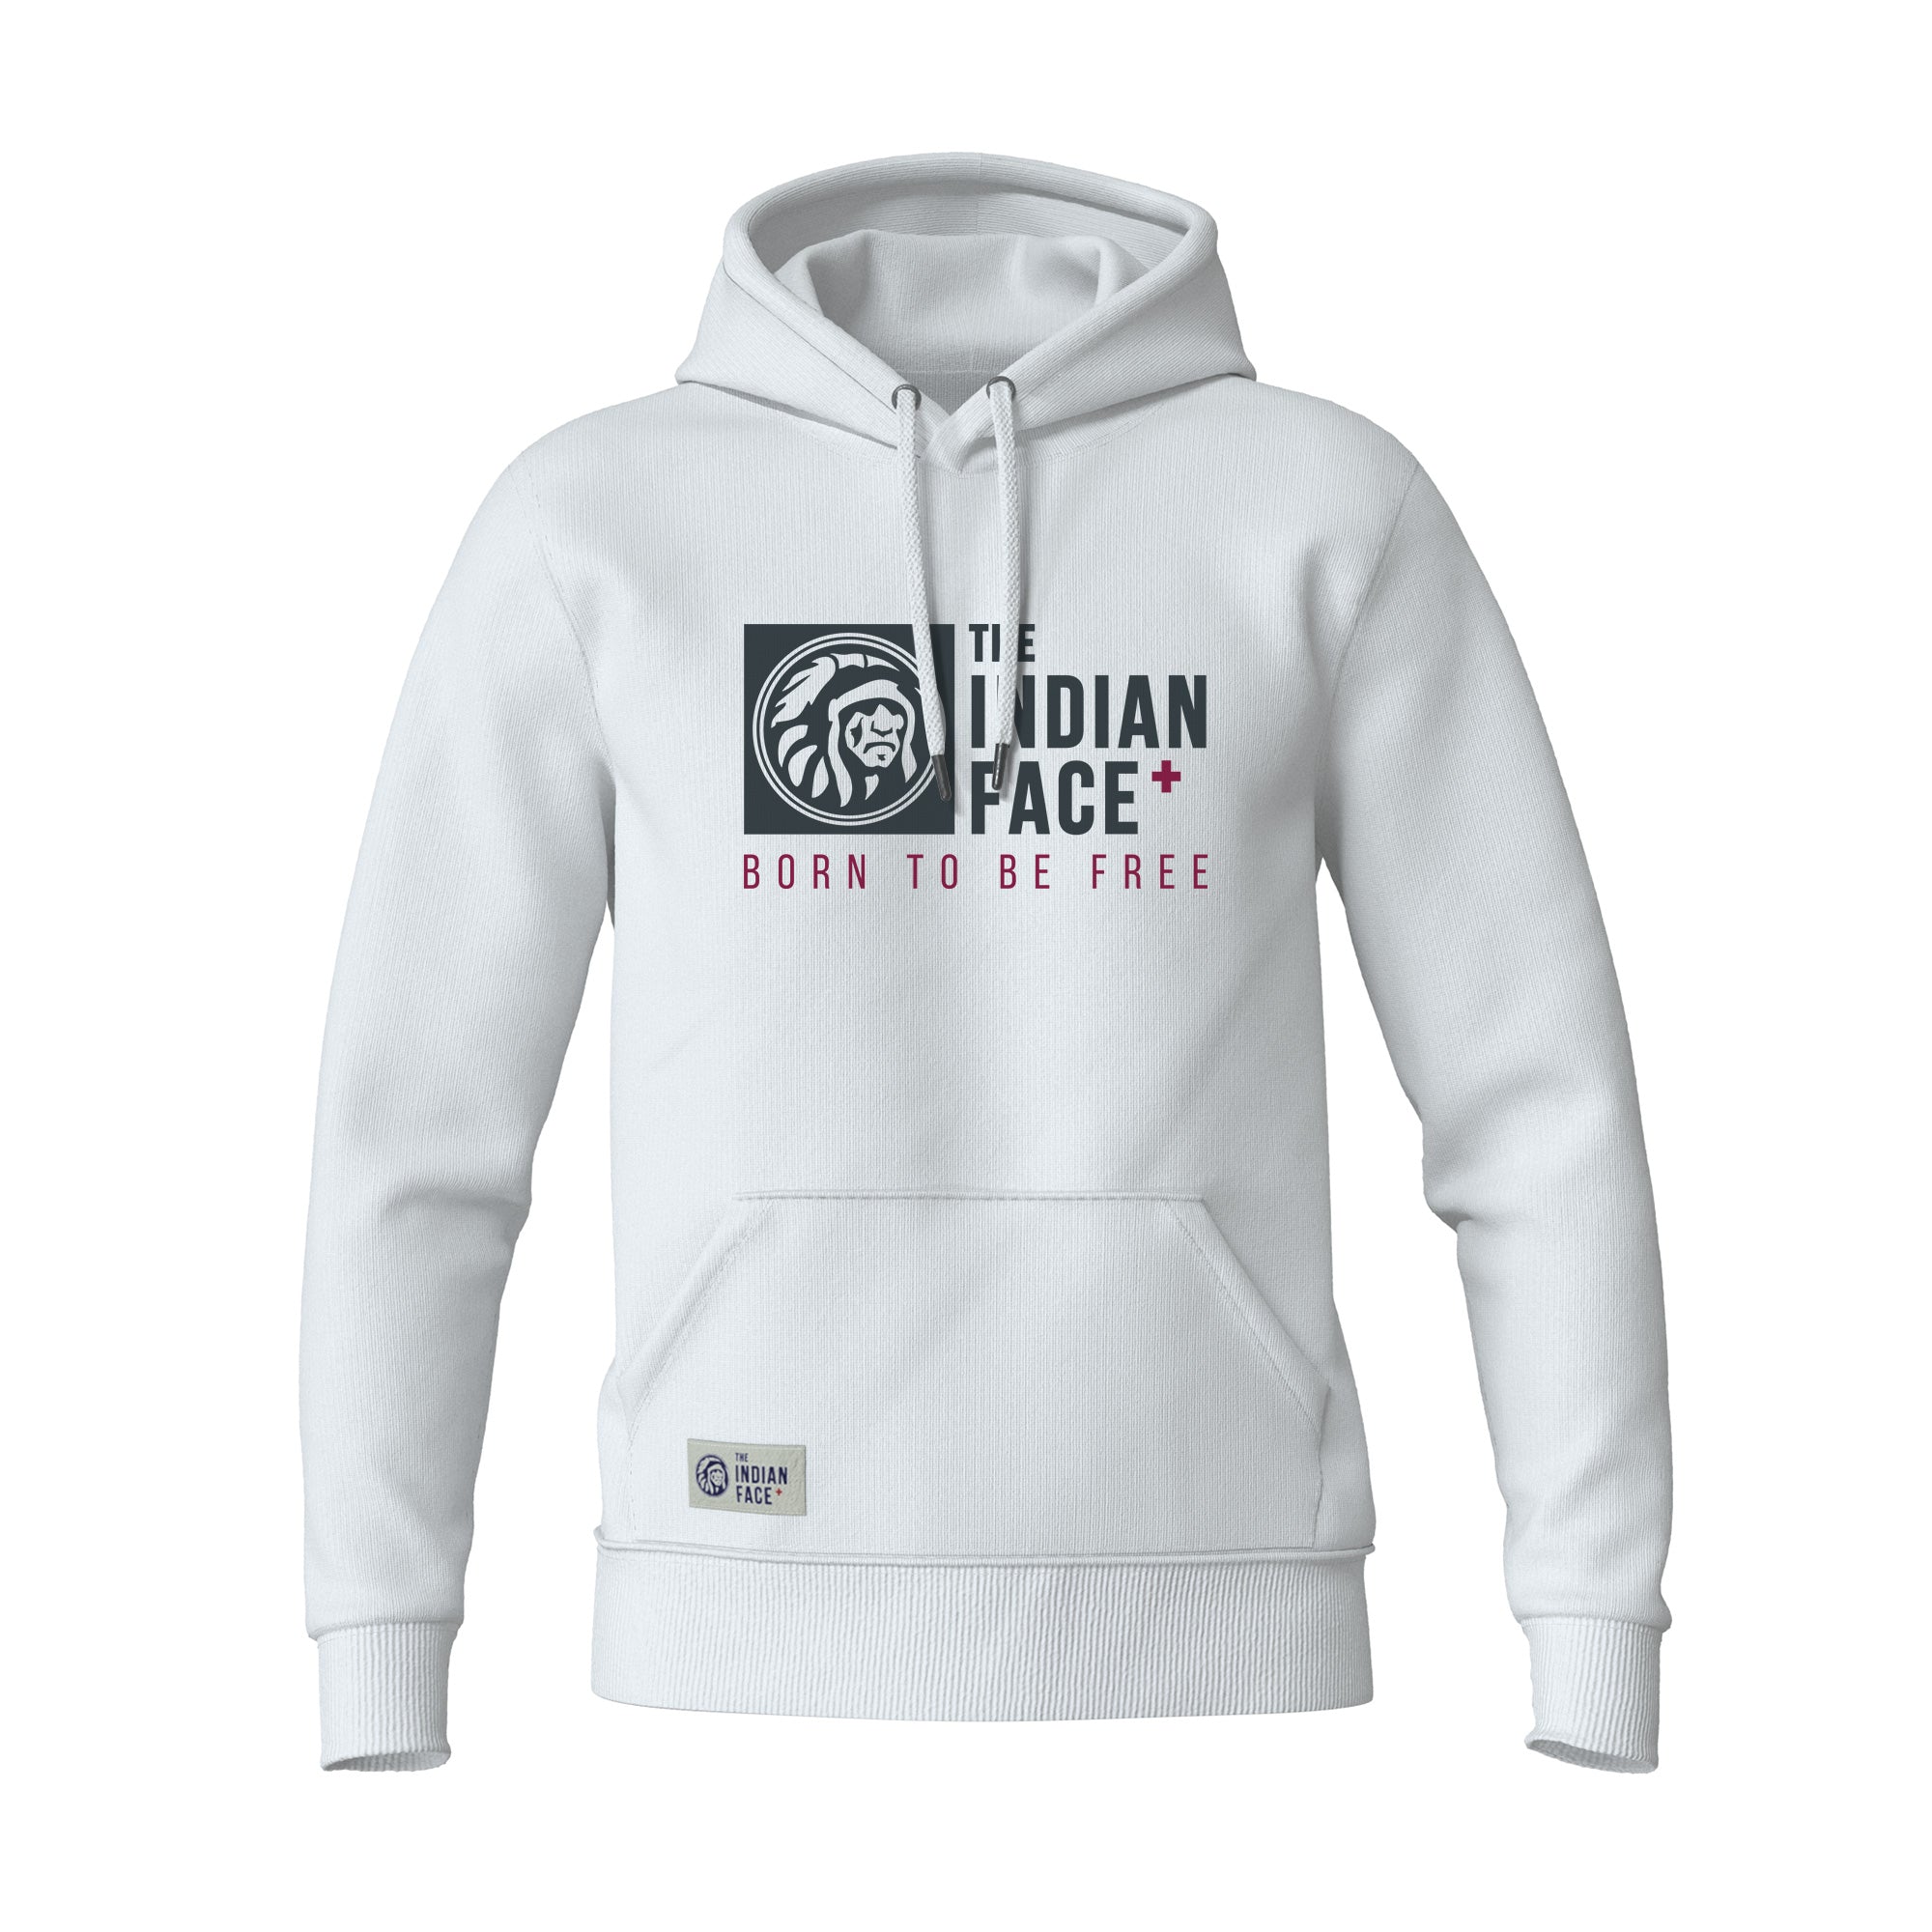 Sudadera The Indian Face Born To Be Free Capucha - blanco - 